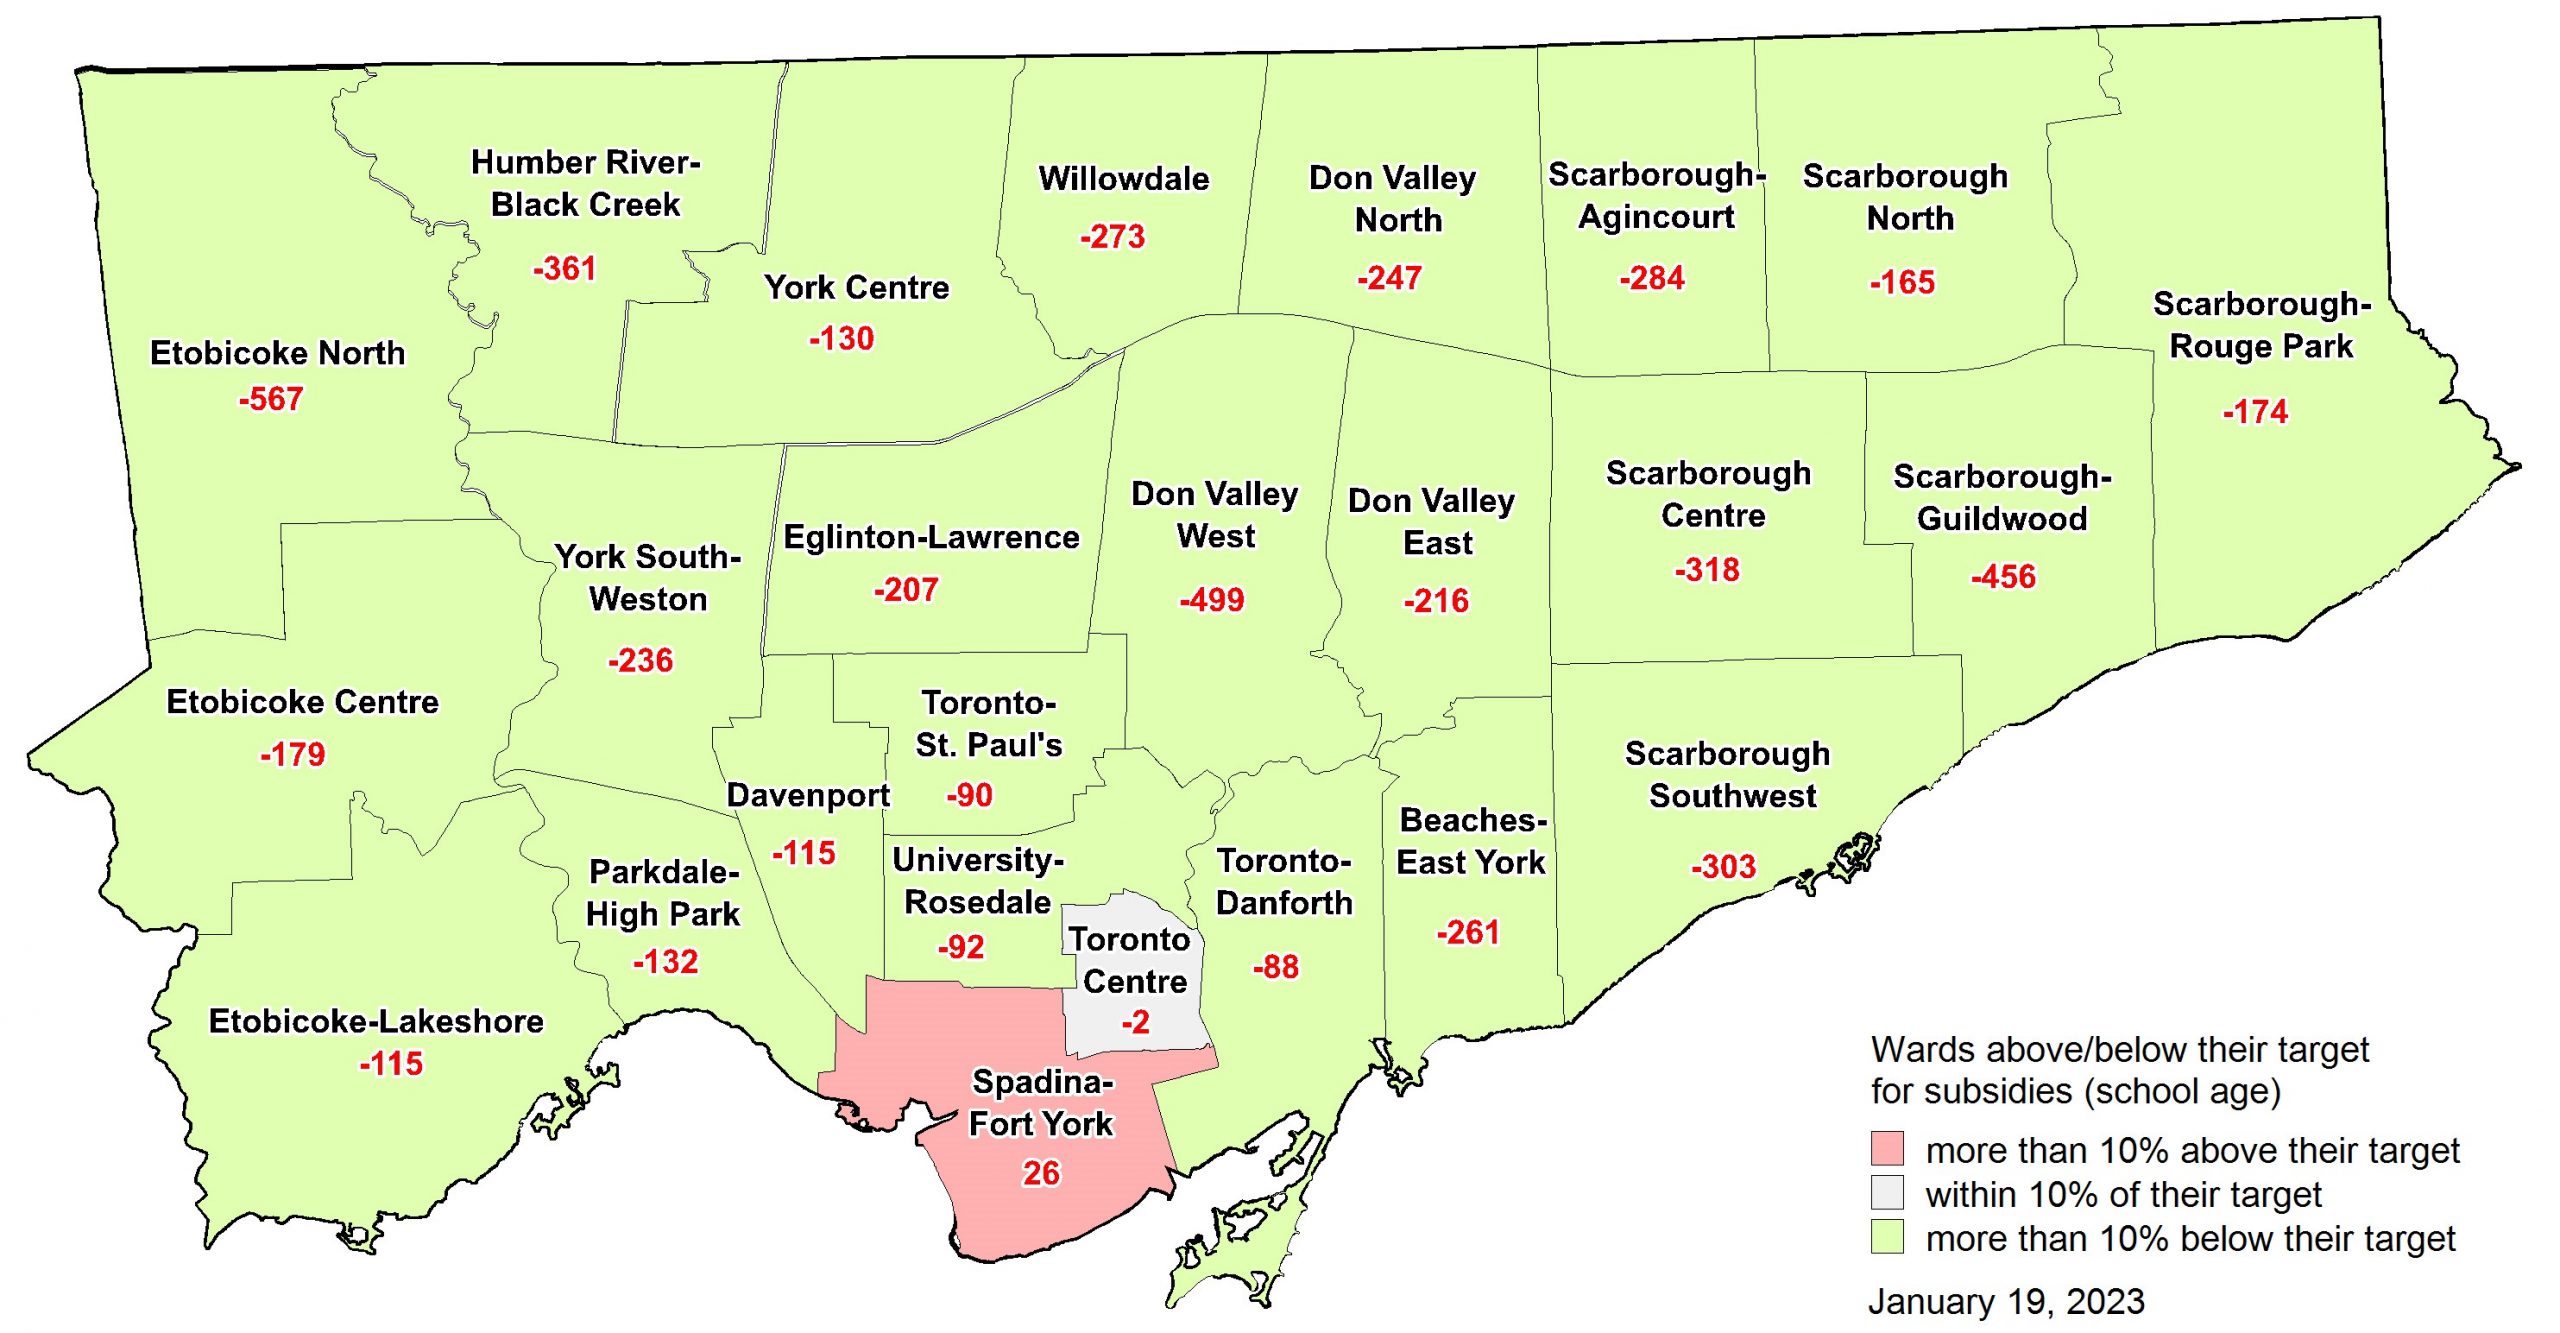 Map showing which wards are above, below or at their target number of subsidized school age children. The data for this map can be found under the header - The Data Behind the Maps.